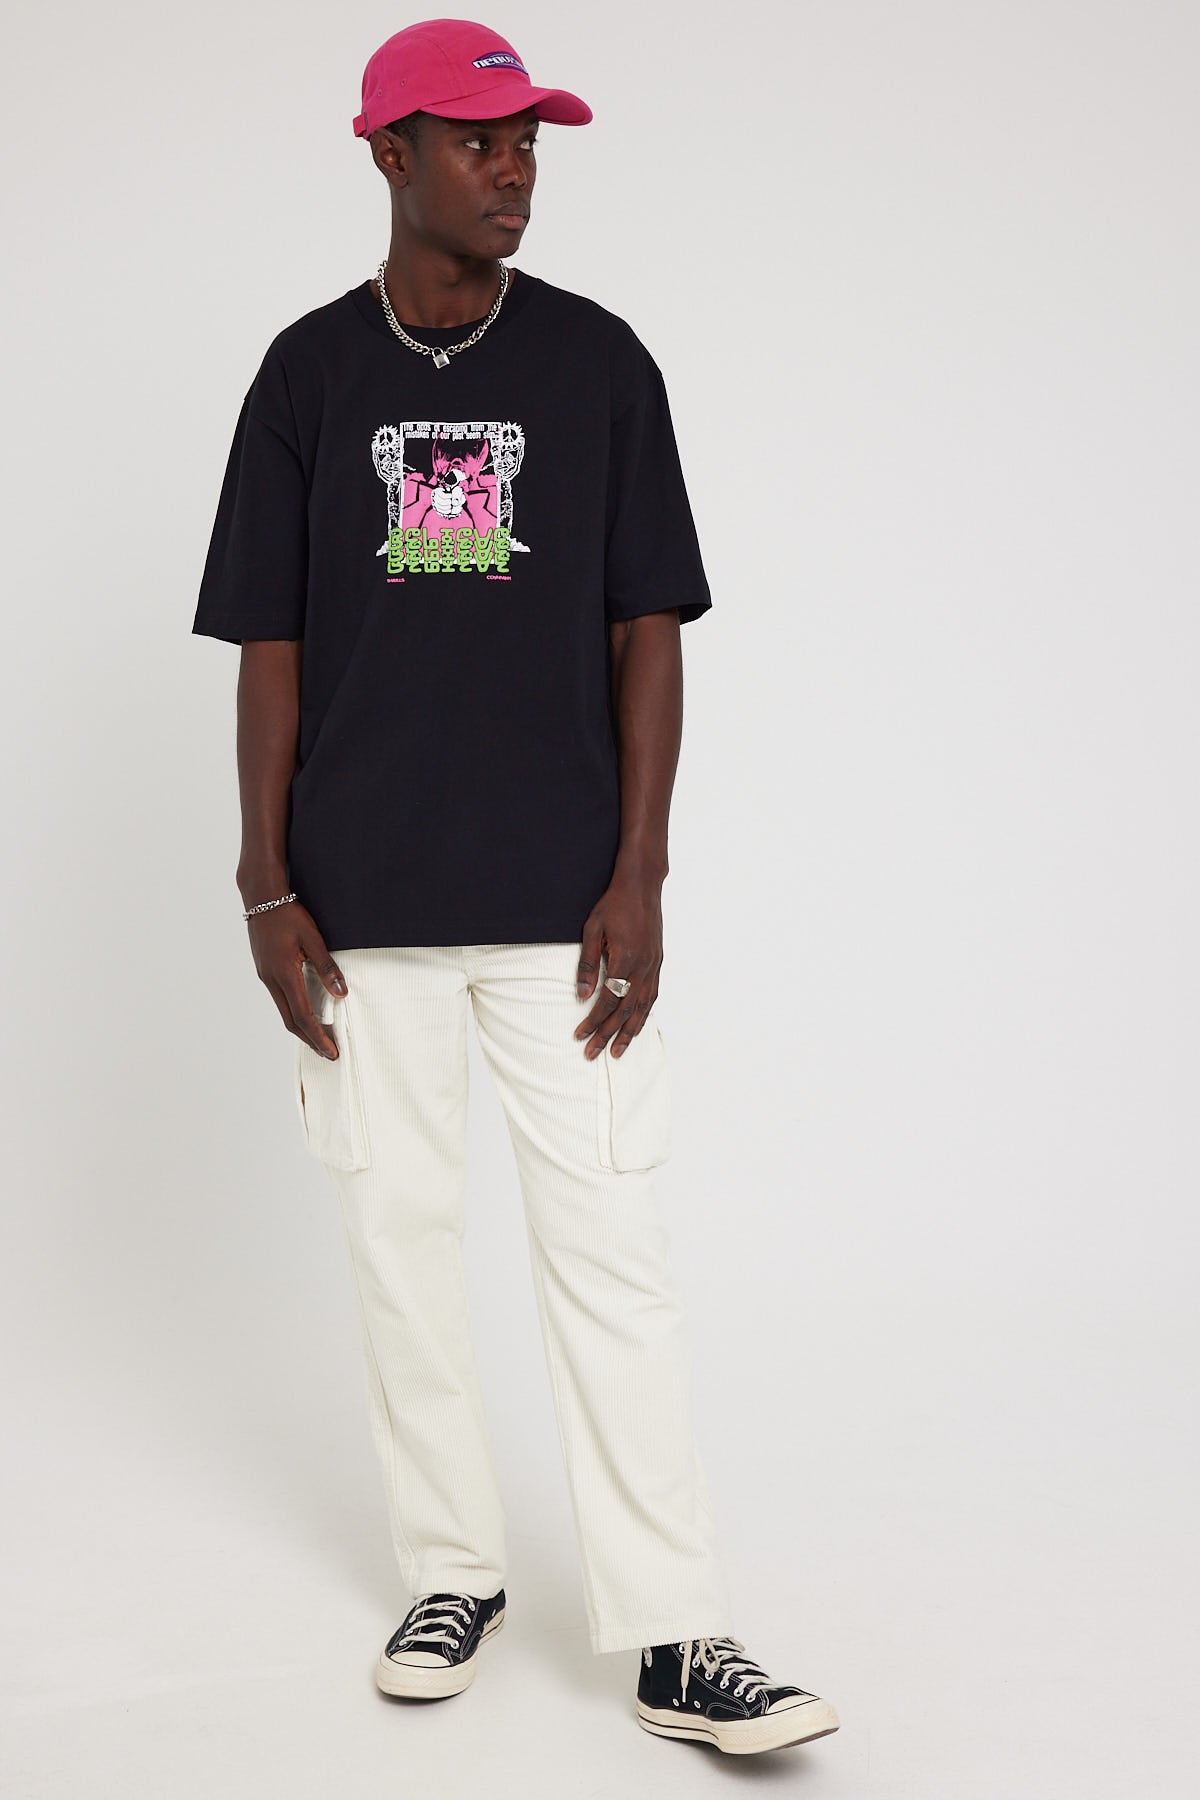 Thrills Escape the Past Oversized Fit Tee Black – Universal Store